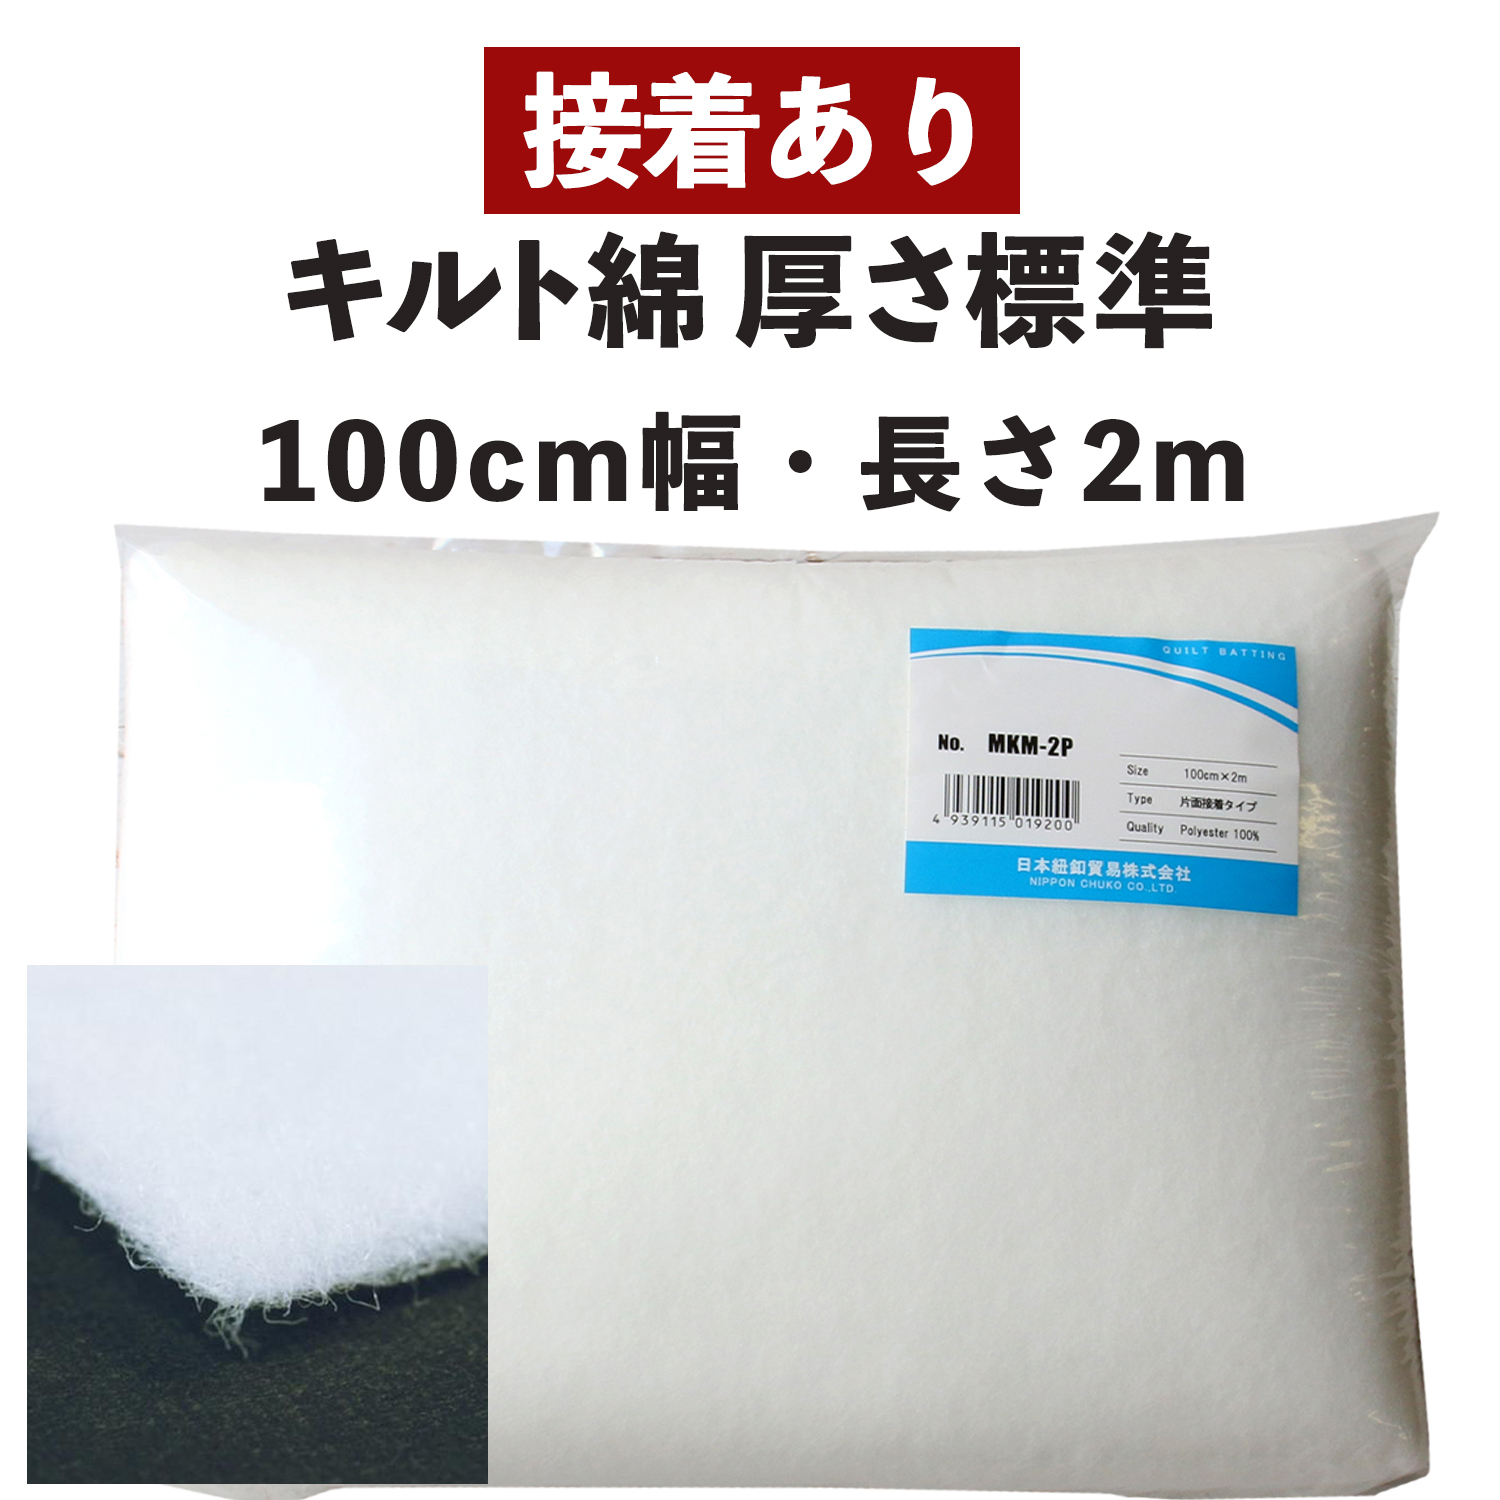 MKM-2P quilt batting", medium thickness", adhesive on one side", 2m (pack)